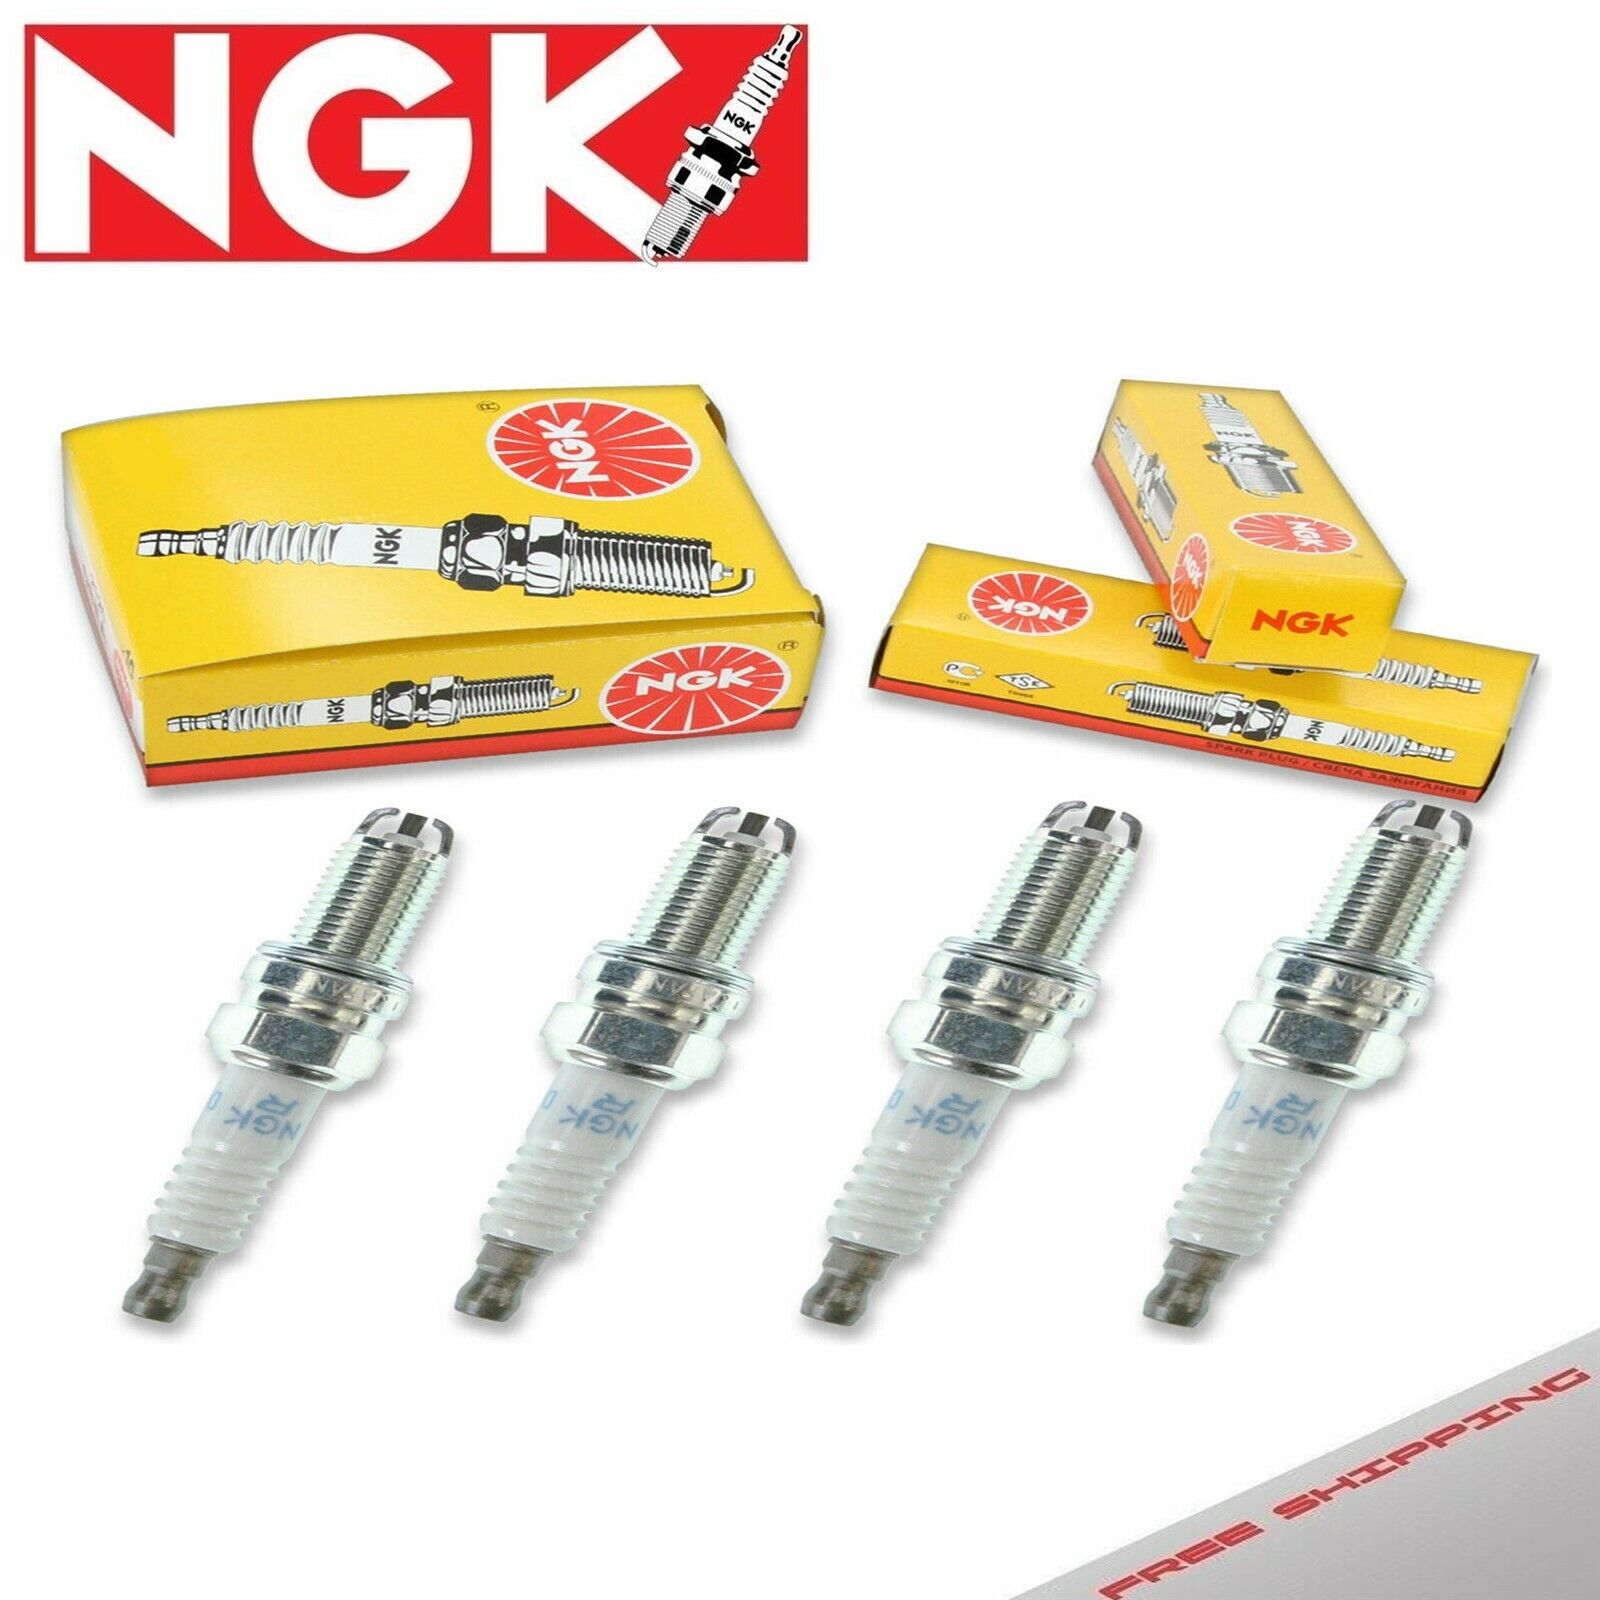 4 x Spark Plugs Made in Japan NGK Racing 2773 R6061-11 2773 R606111 Tune Up Kit